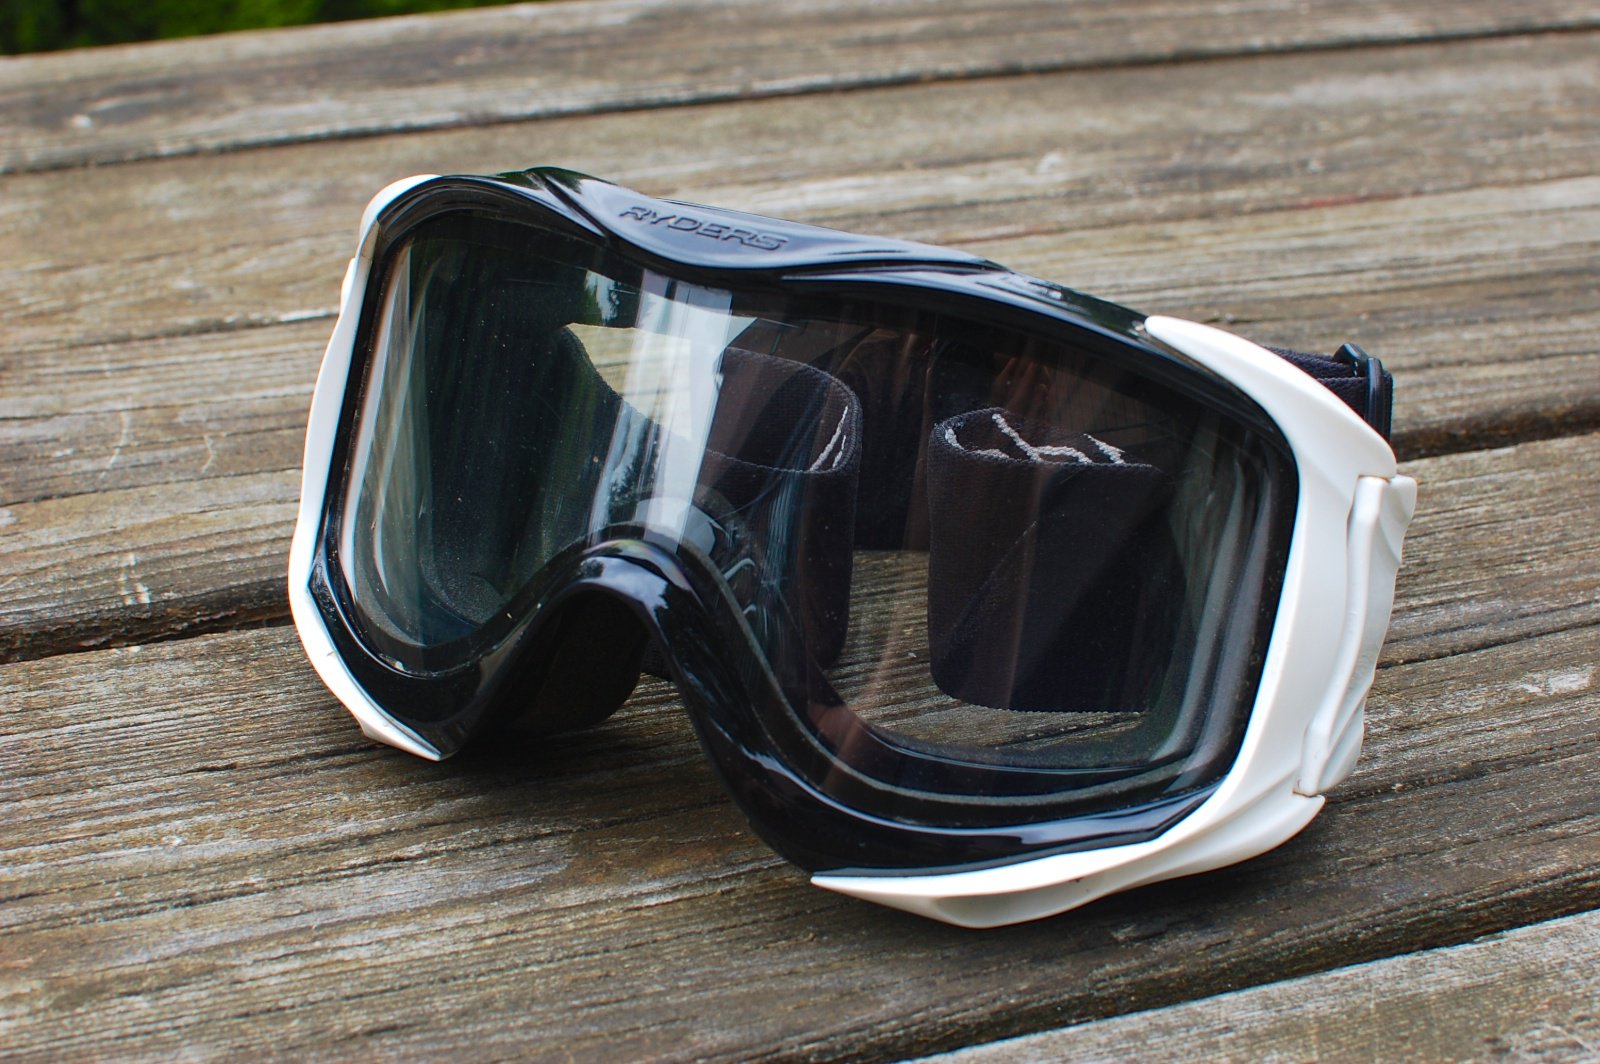 Ryders Shore Goggles: Reviewed